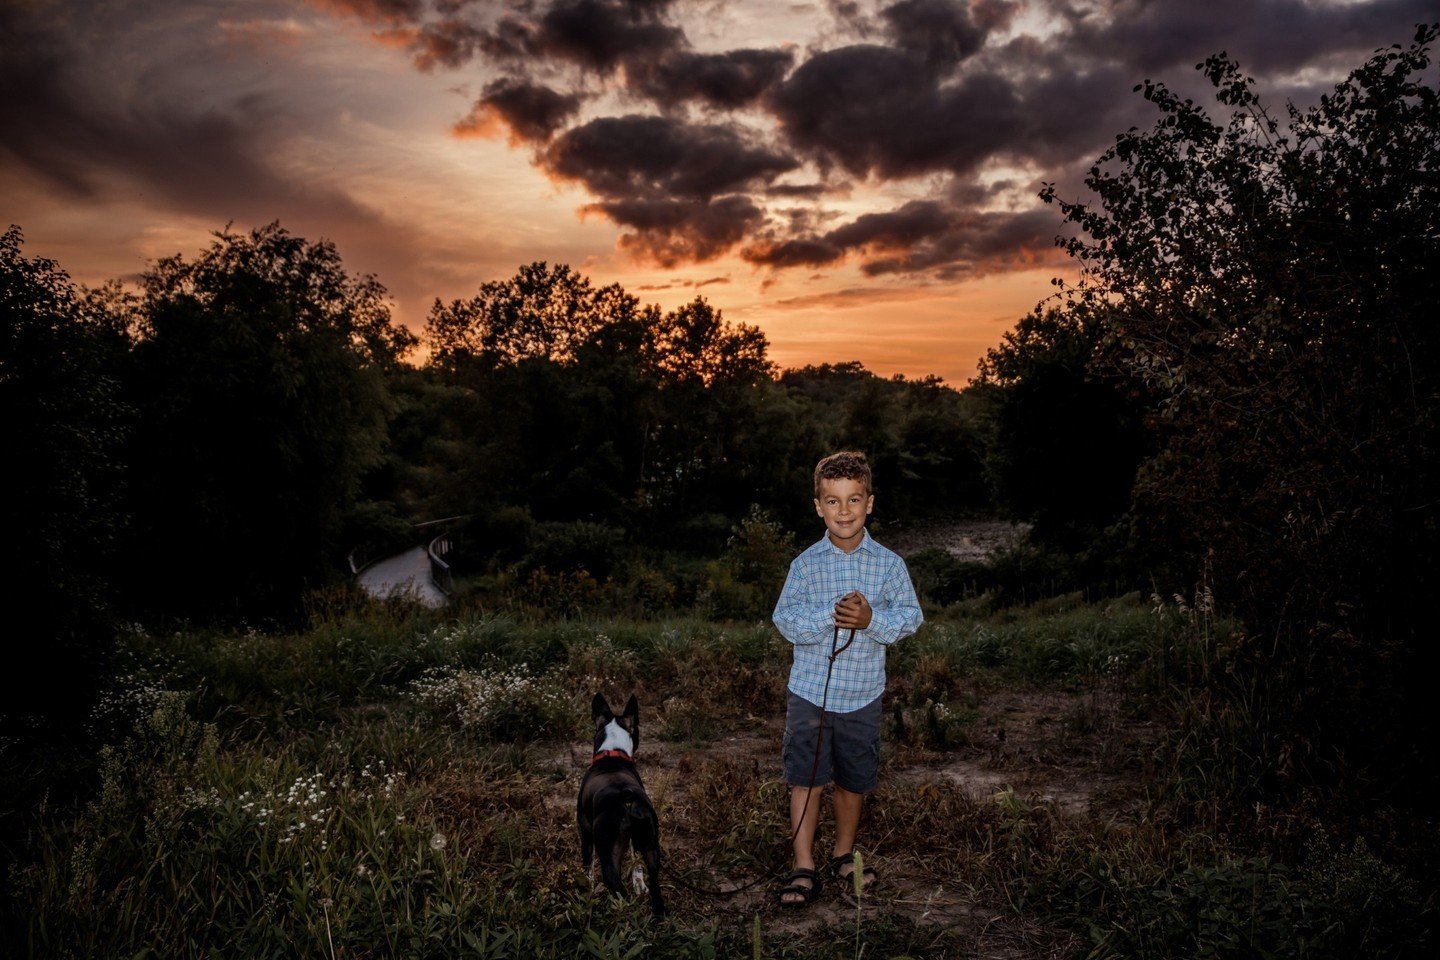 My adorable nephew and his dog who was done having his picture taken!⁠
That sky though!